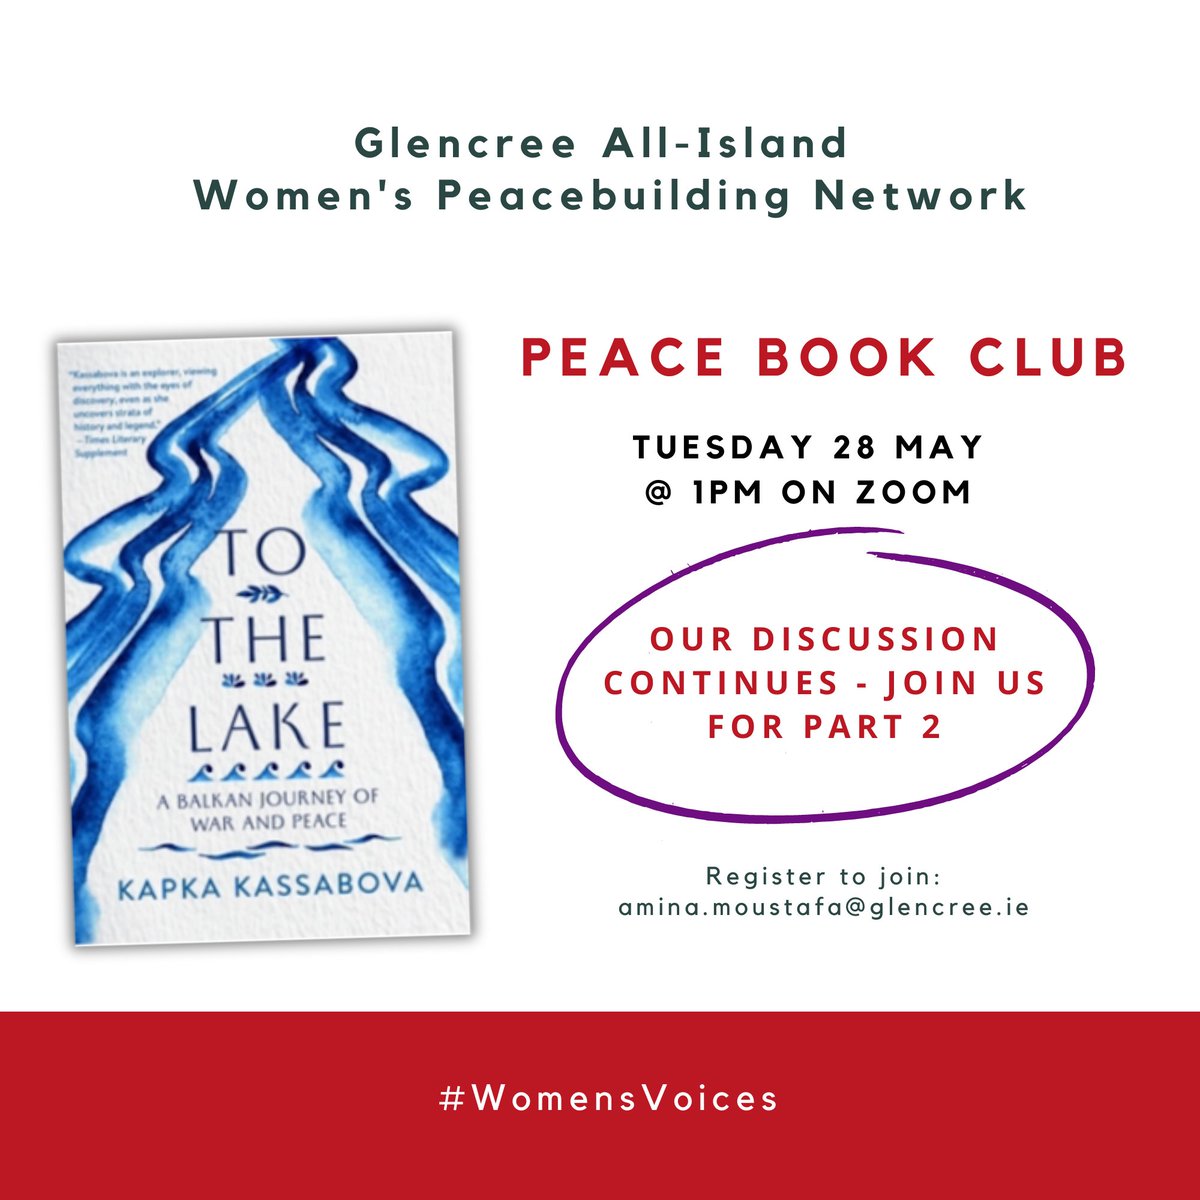 The complexity of social identity & how shifting borders further impacts this & the politics of today formed part of our #peace #bookclub discussion of Kapka Kassabova's 'To the Lake' this week. Our members have decided to continue this discussion at our next meet on May 28.